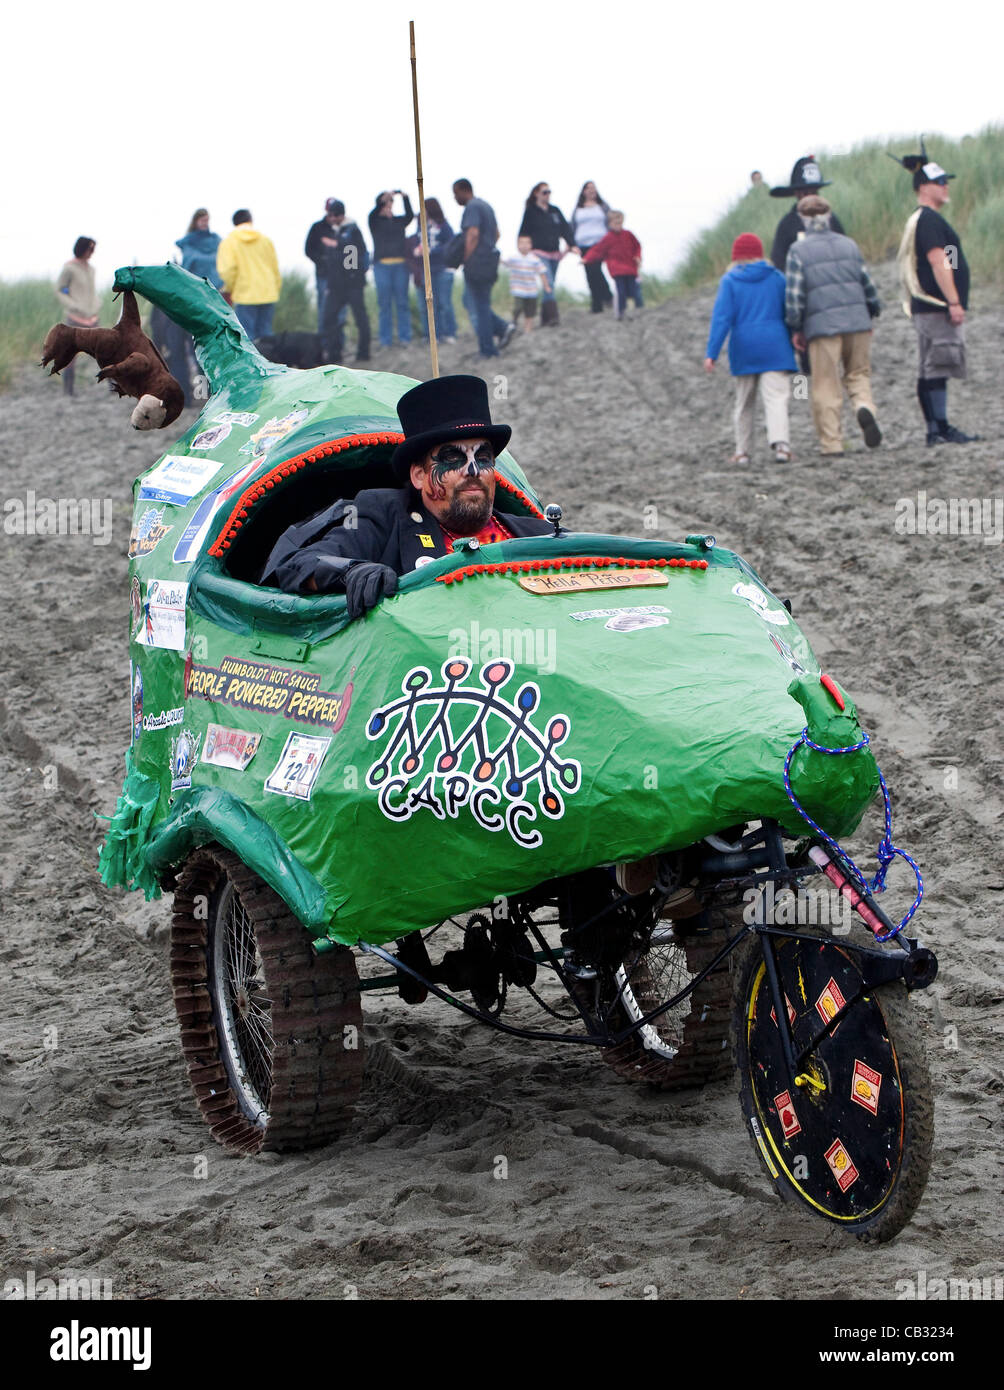 May 26, 2012 - Arcata, CA, USA -  The 'Humboldt's Hotsauce's Hella Peno' entry exits the sand dunes and starts down the beach on the first day of the 44th Annual Kinetic Grand Championship, a three-day, 42-mile bicycle race for all-terrain, human-powered art sculptures. Stock Photo